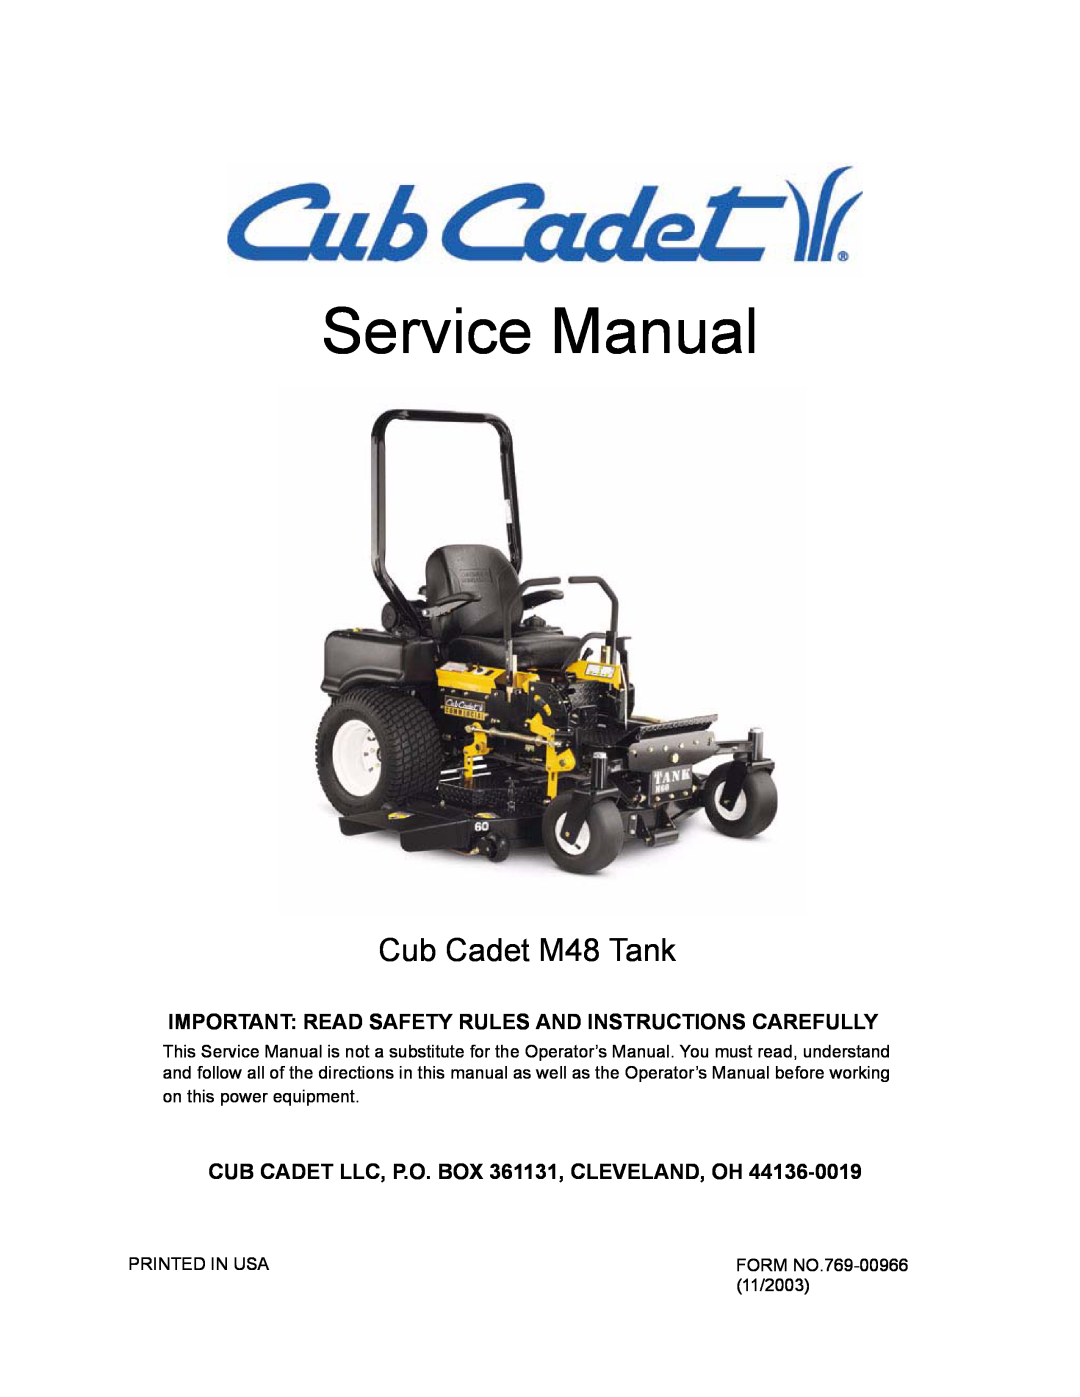 Cub Cadet M72 manual they’ll be speechless, Your clients won’t just be satisfied, Commercial, R Comme L Ia C, Features 